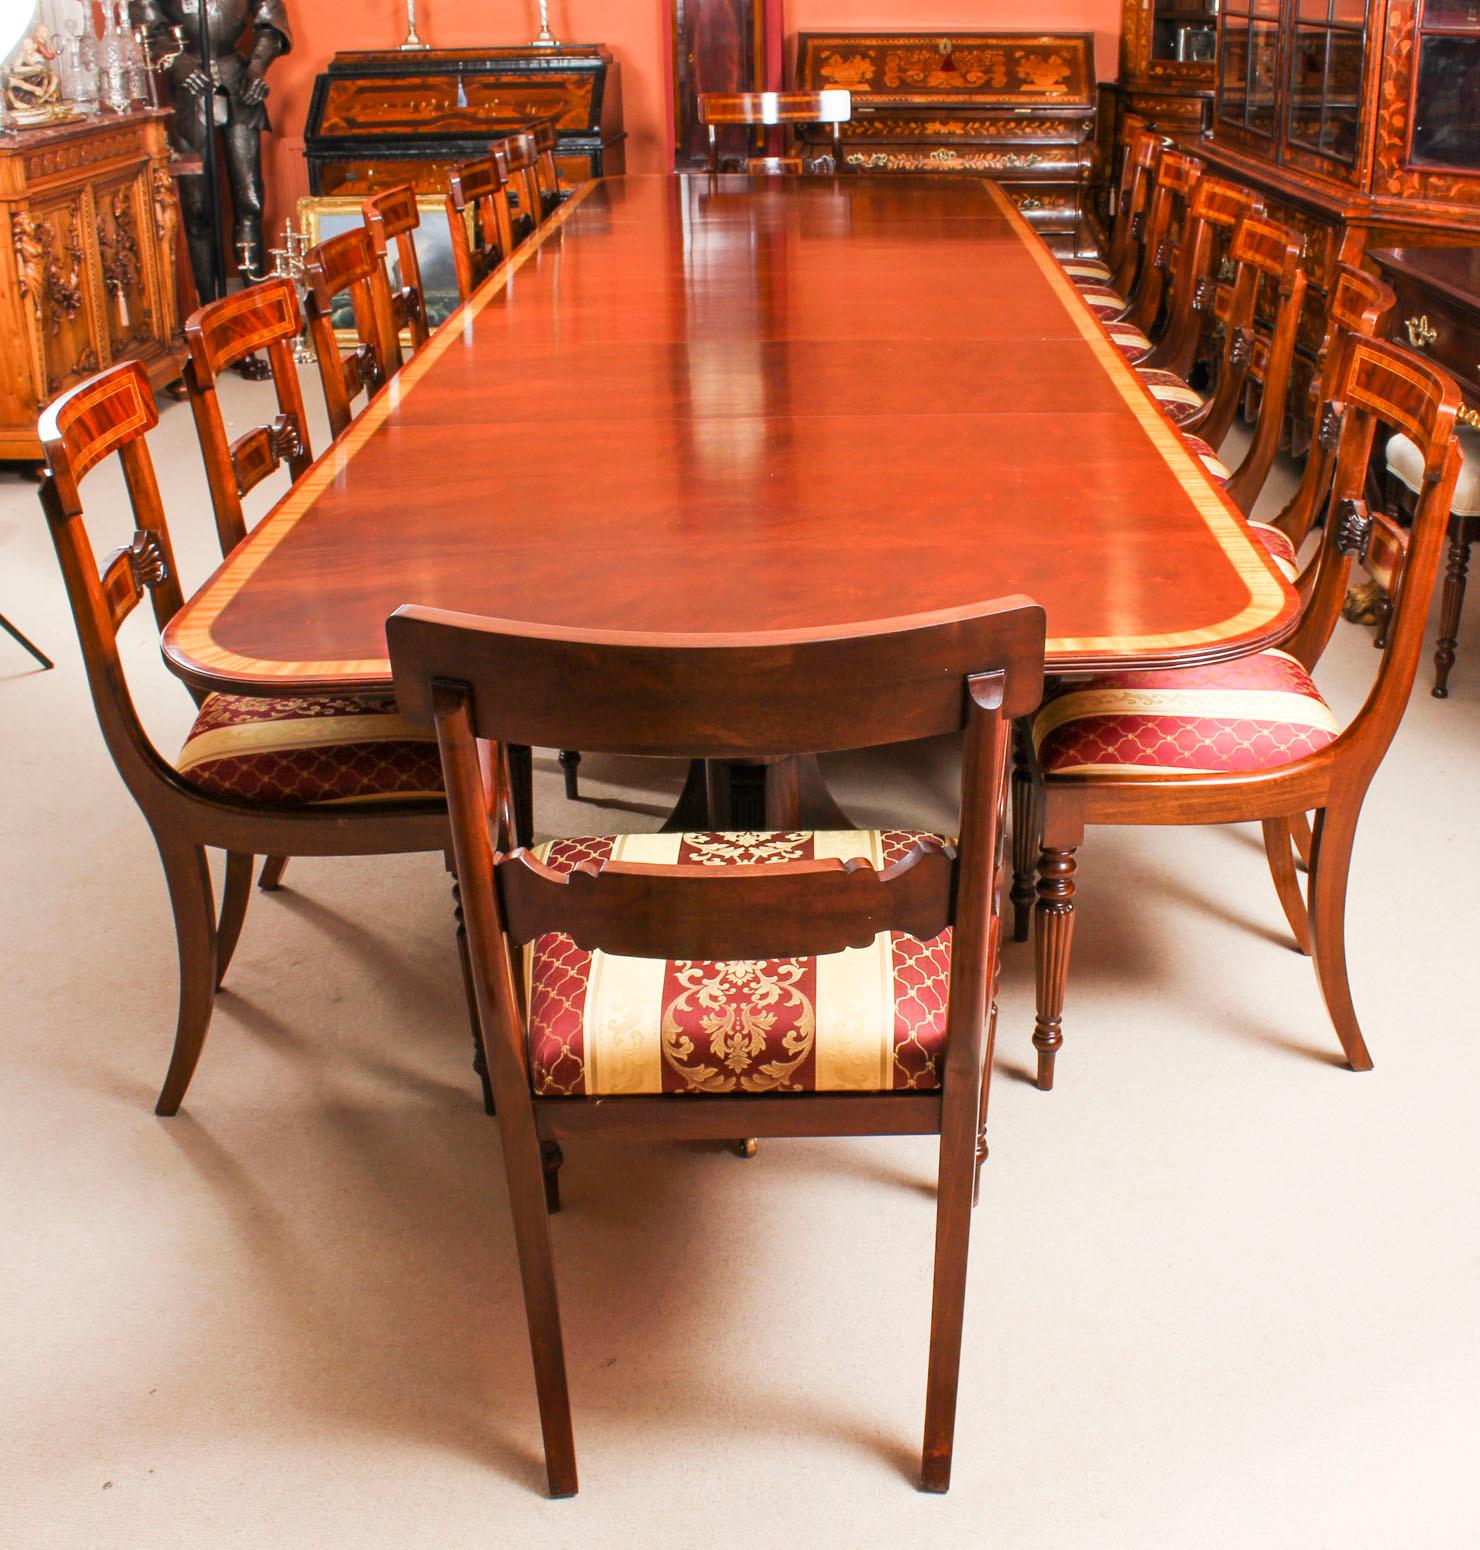 This is a superb dining set comprising a large vintage handmade dining table in elegant Regency style, by the master cabinetmakers Arthur Brett, mid-20th century in date, and a matching bespoke set of fourteen dining chairs.
The table, dating from